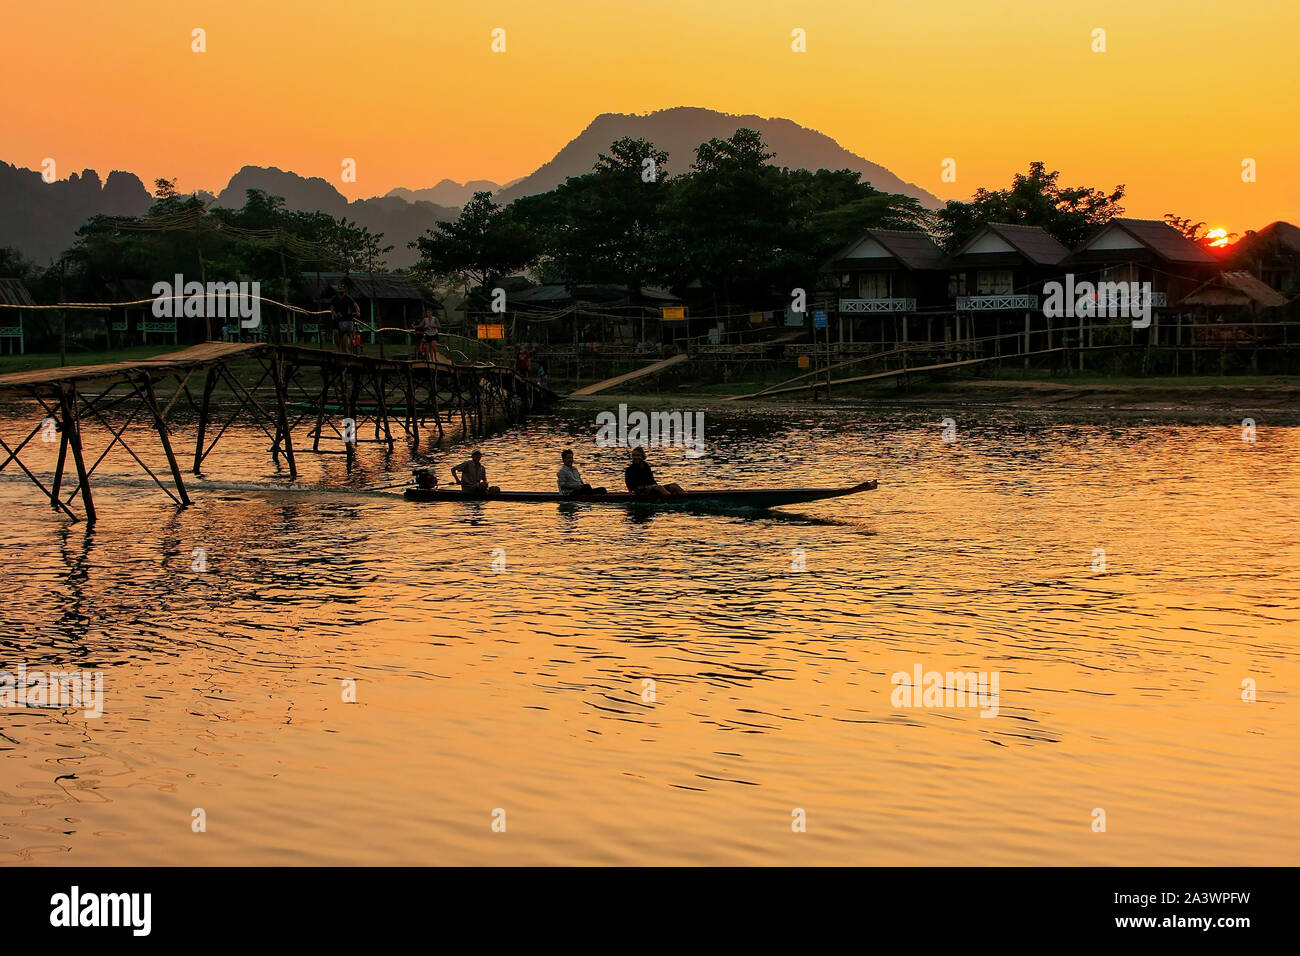 Sunset over Nam Song River in Vang Vieng, Laos. Vang Vieng is a popular destination for adventure tourism in a limestone karst landscape. Stock Photo